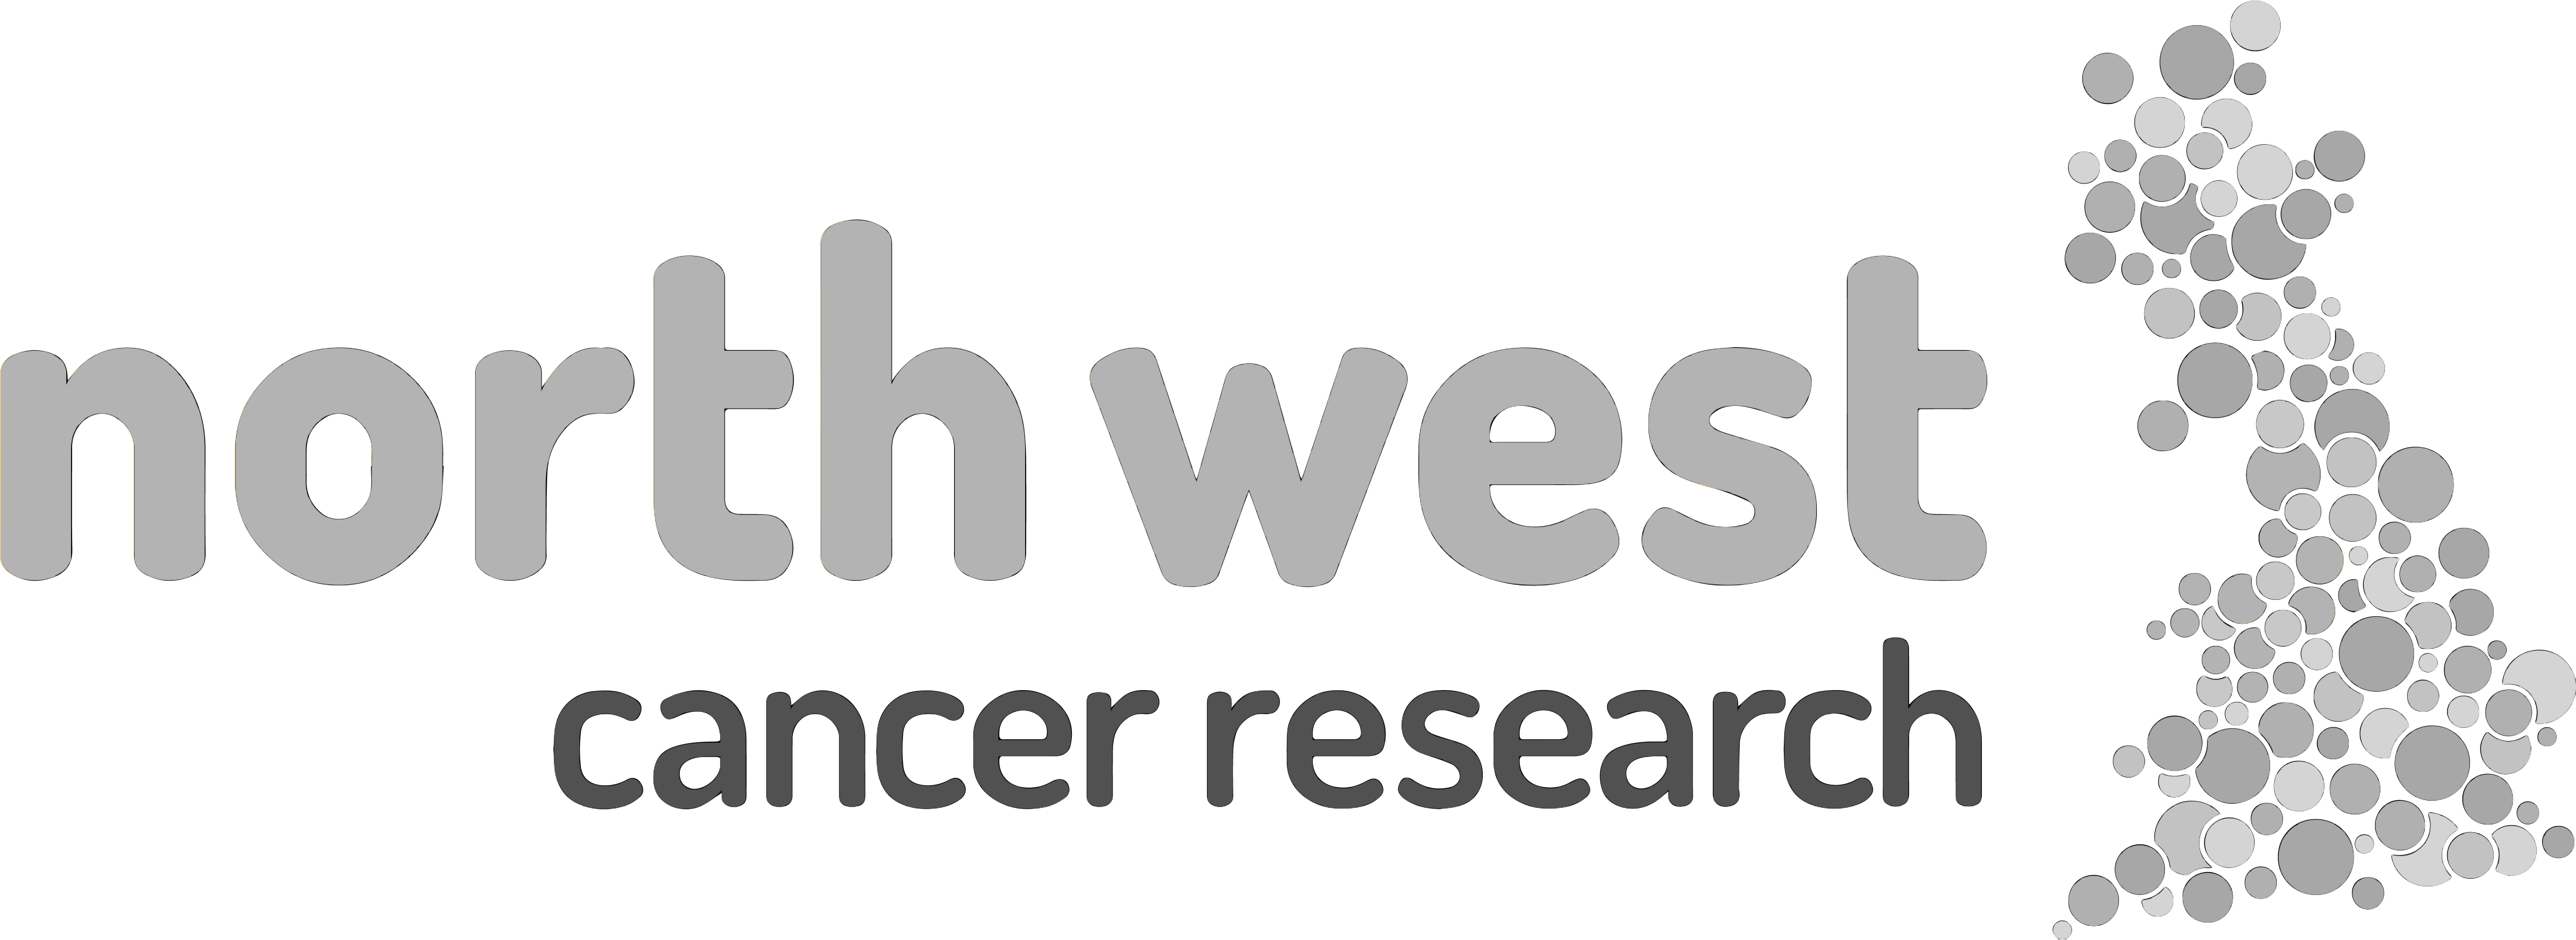 We're sponsored by NW Cancer Research